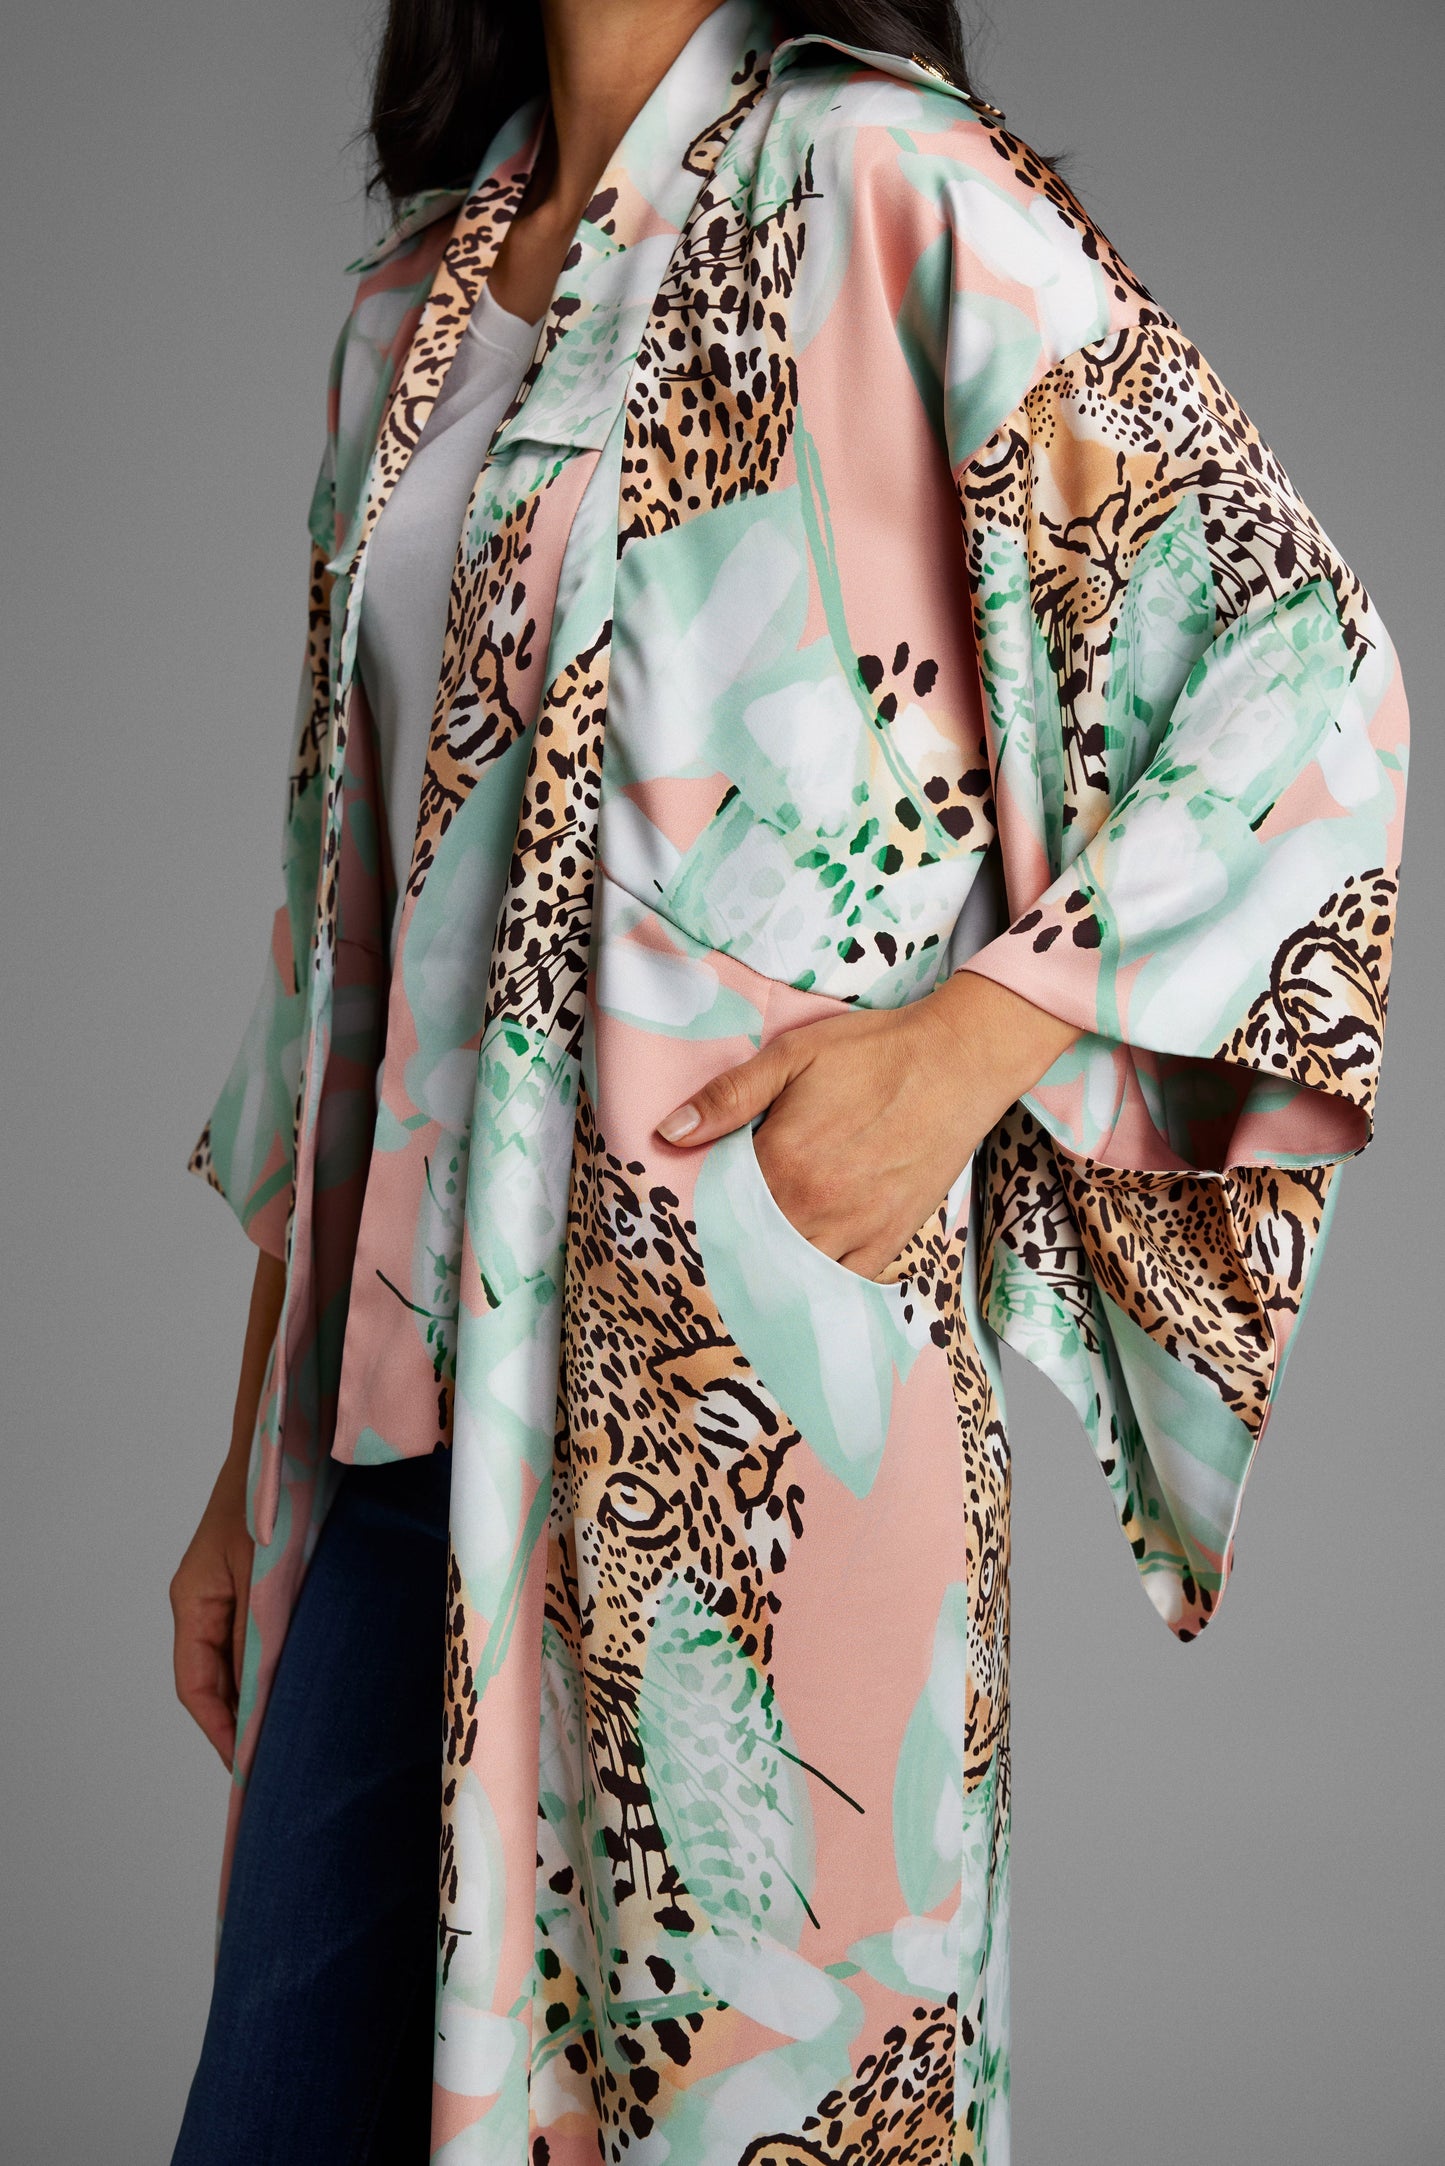 Woman wearing an all over tropical animal print kimono duster made from sustainable recycled materials